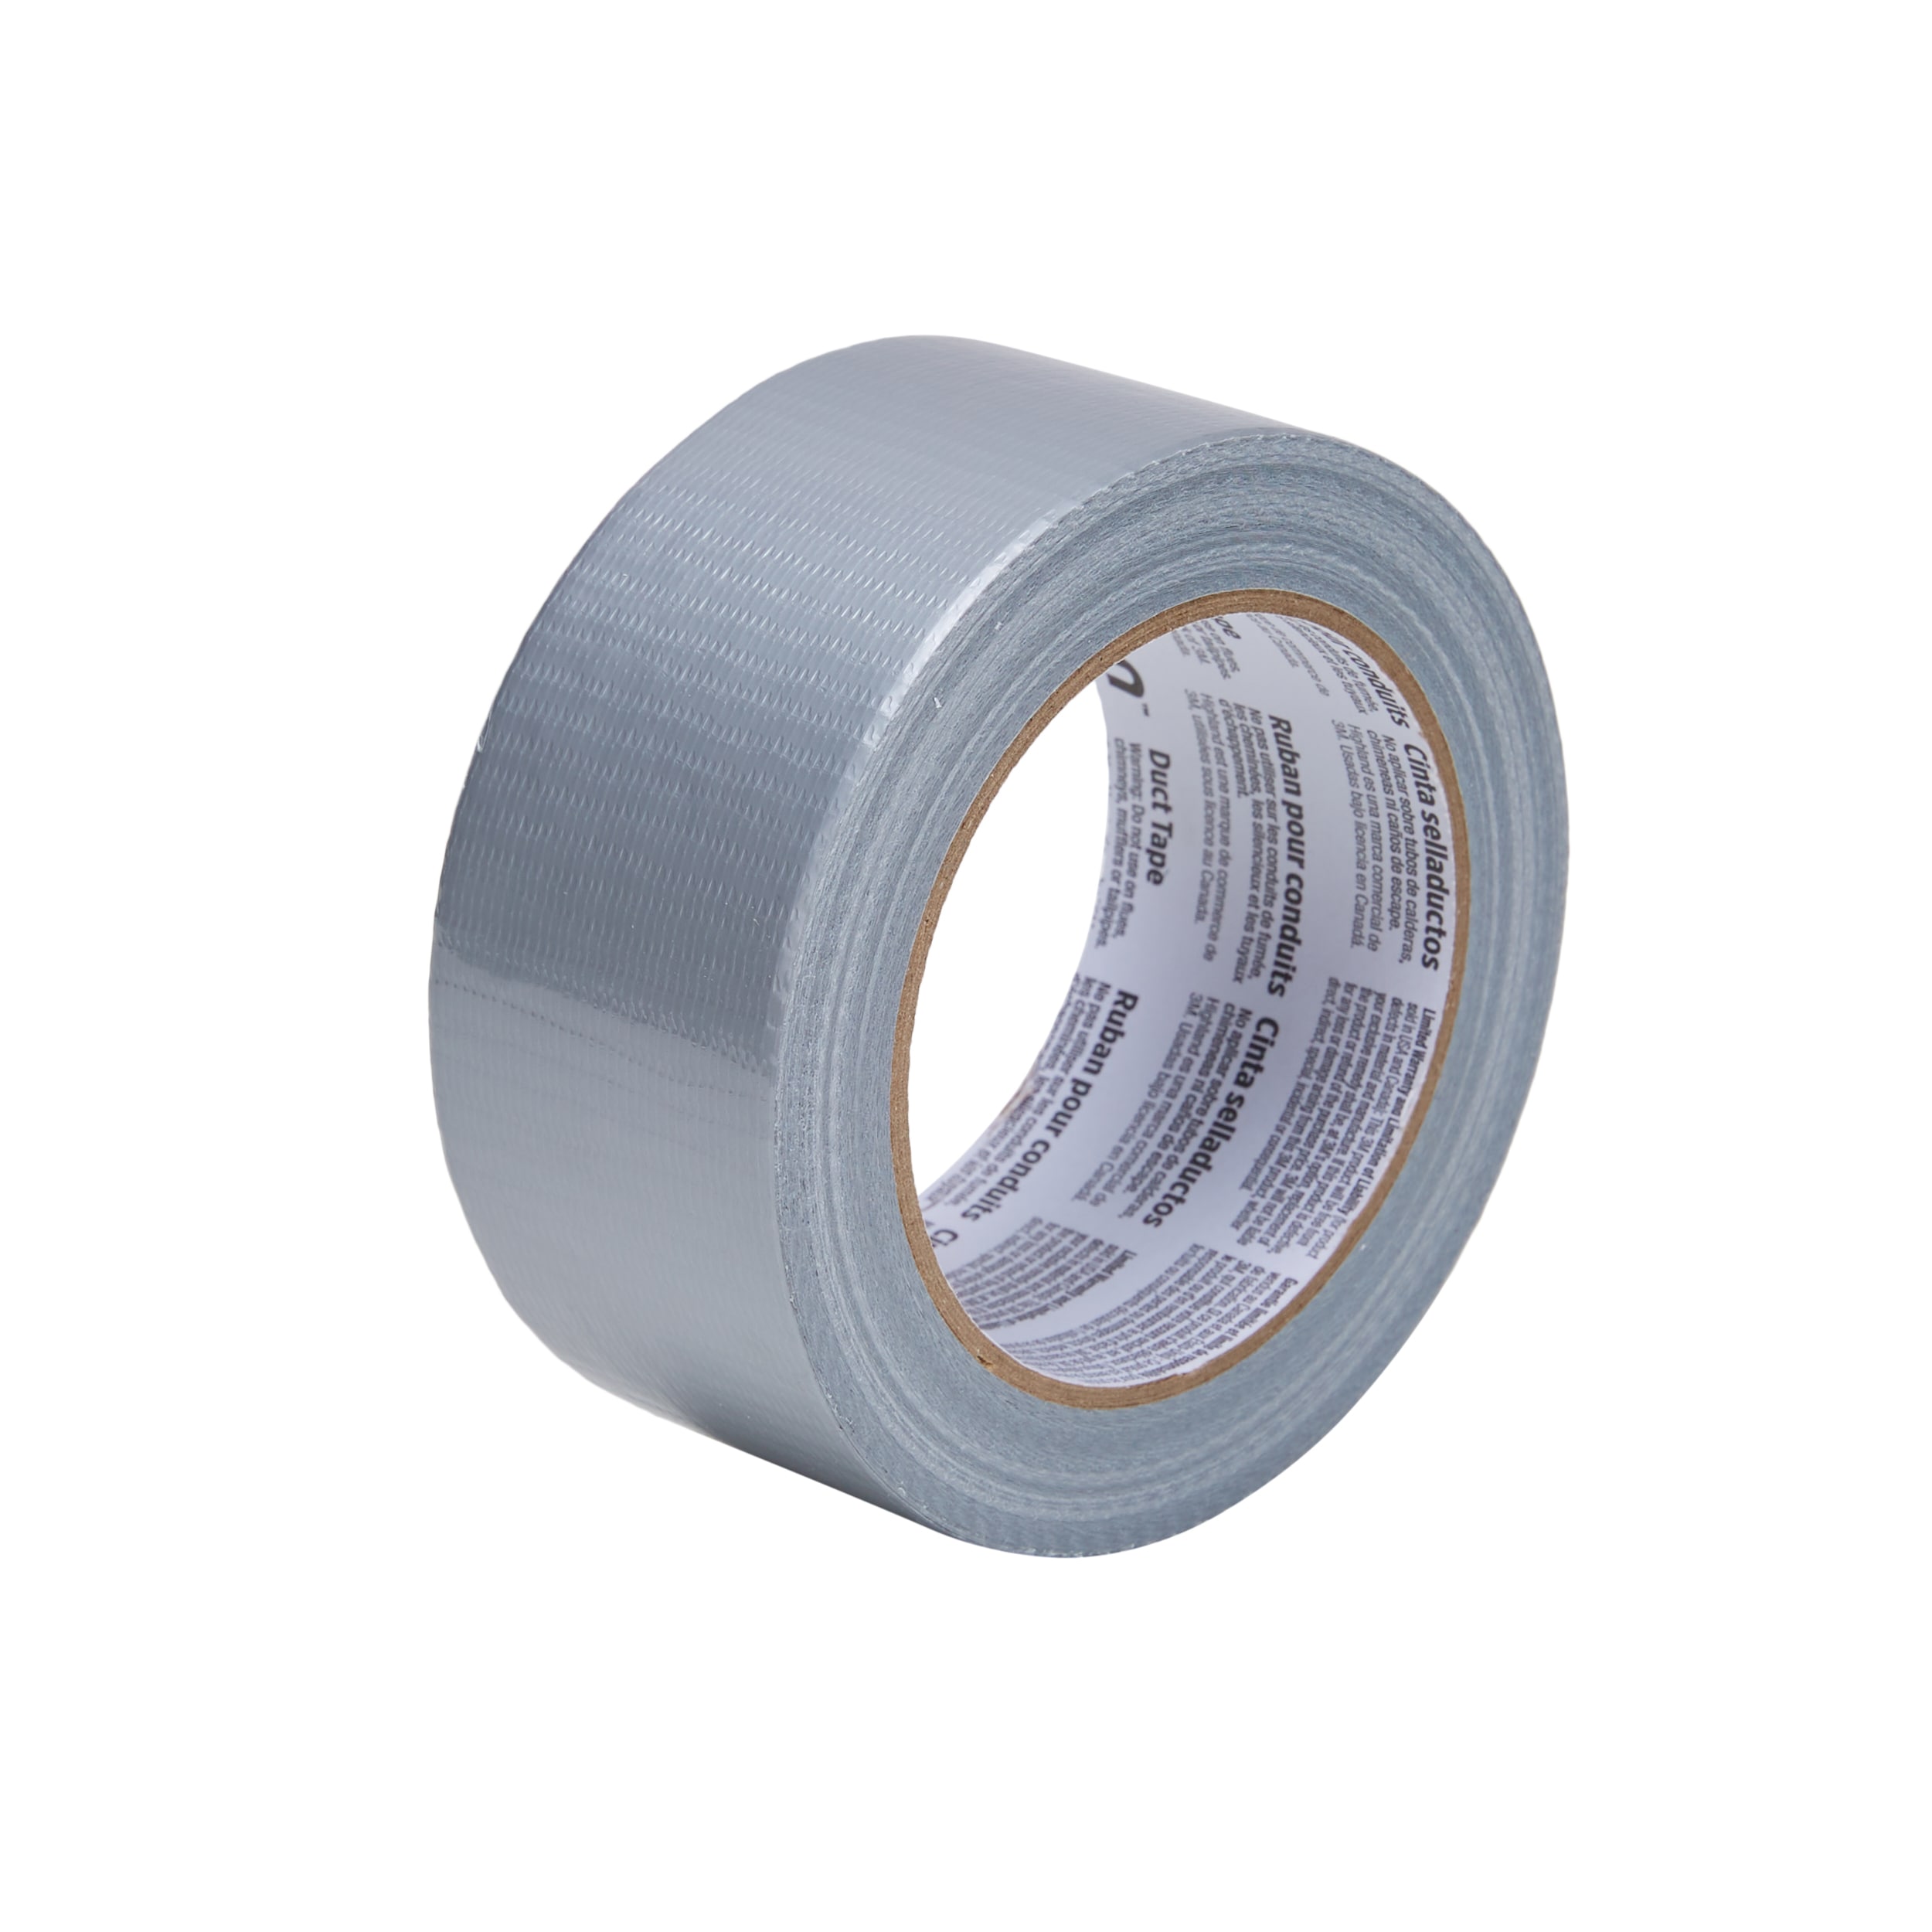 DUCK TAPE Duck Tape 222226 Duct Tape, 50m x 50mm, Silver, Gloss Finish